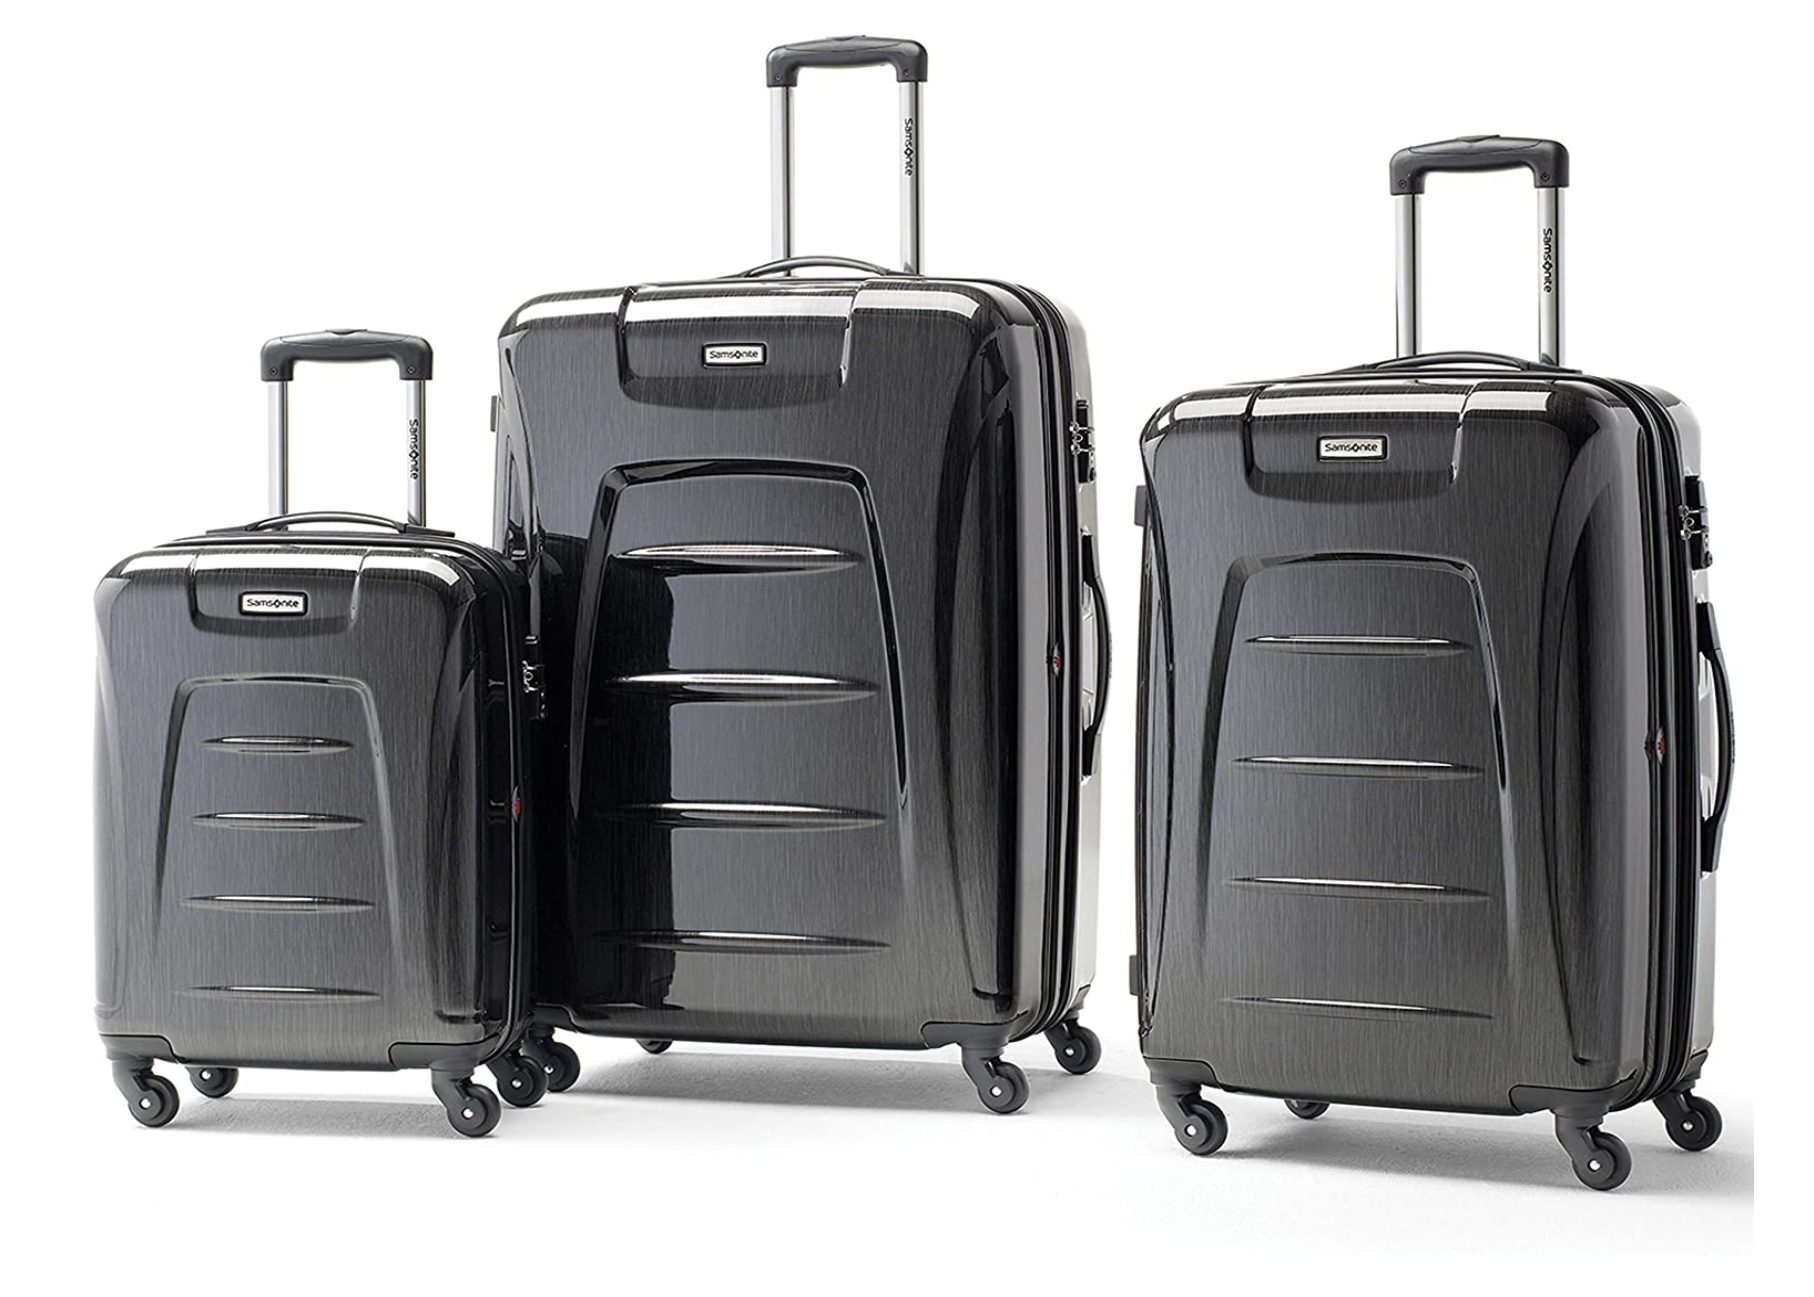 samsonites-new-beautiful-suitcase-is-3-piece-set-of-four-folds-2020-6-21